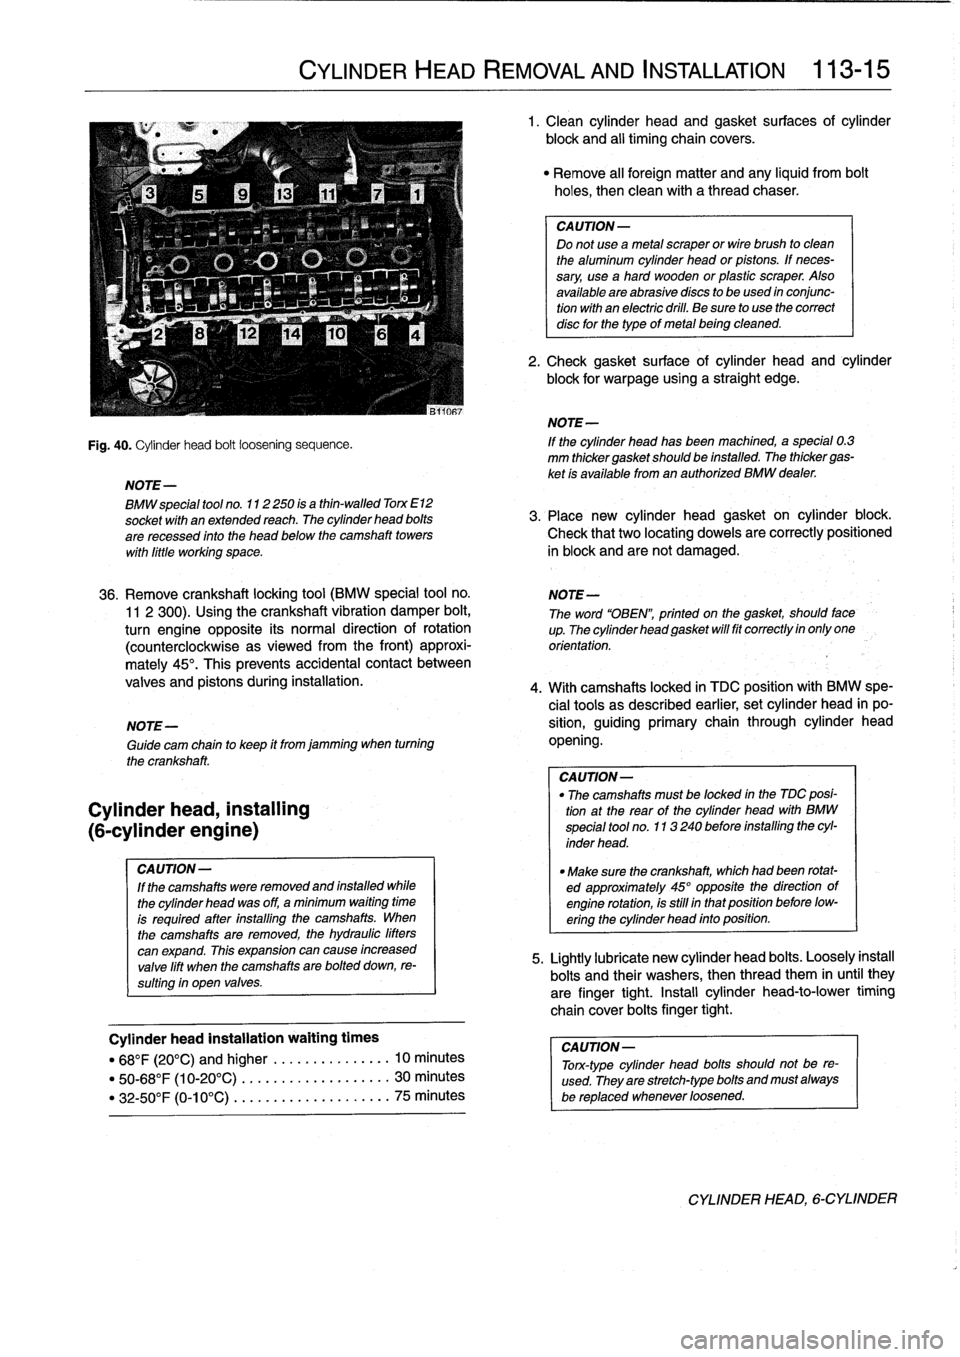 BMW 328i 1994 E36 Workshop Manual 
NOTE-

Cylinder
head,
installing

(6-cylinder
engine)

CAUTION-

If
the
camshafts
were
removed
and
installed
while

the
cylinder
head
was
off,
a
minimum
waiting
time

is
required
after
ínstalling
th